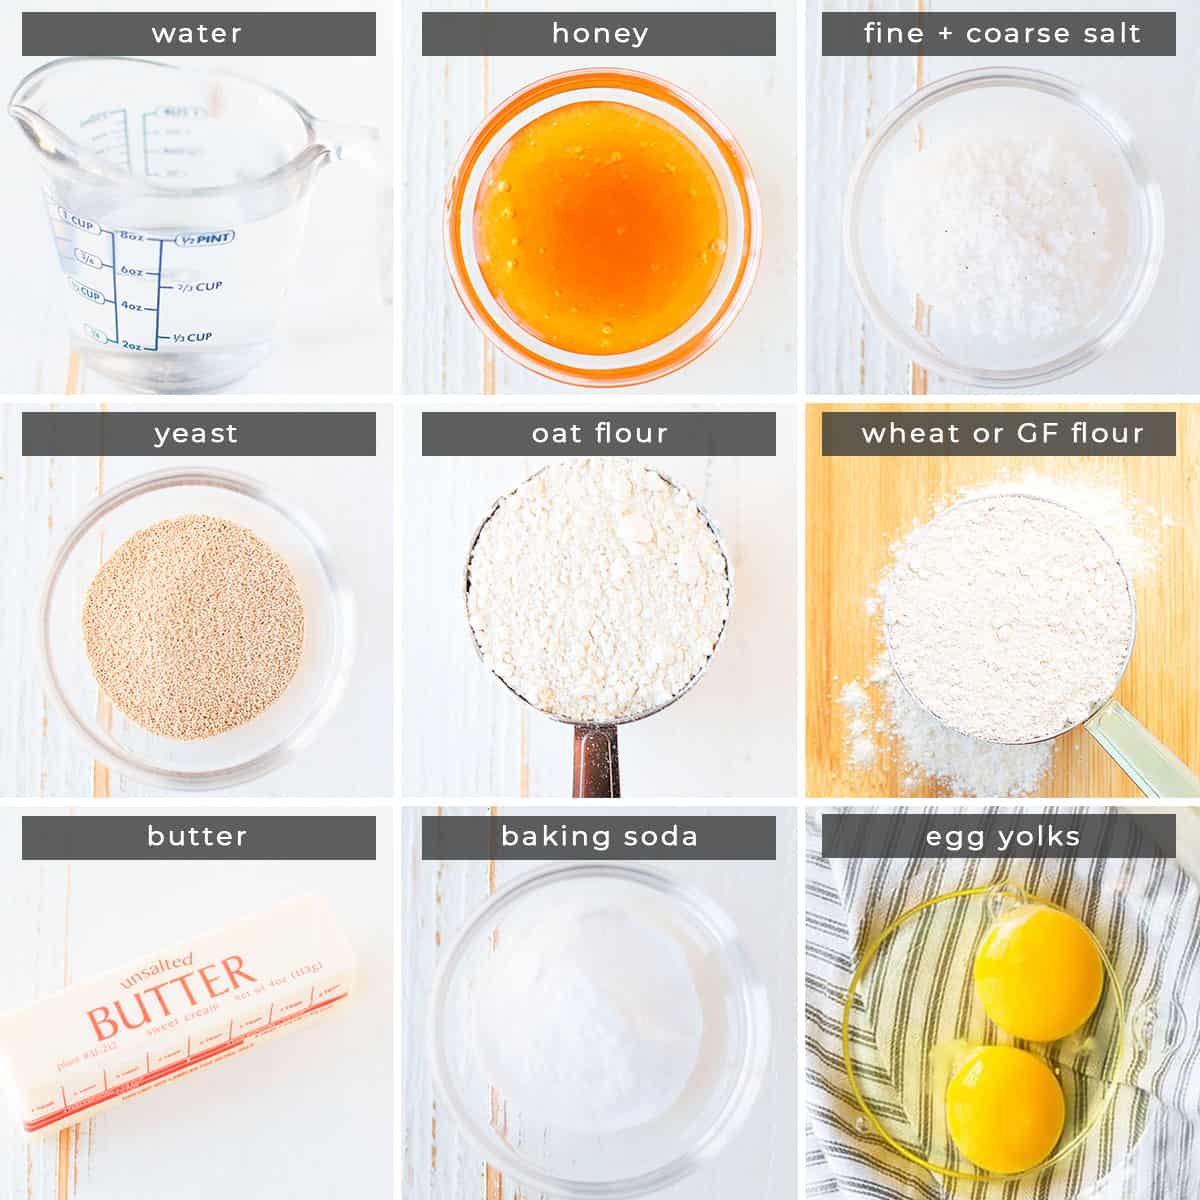 Image containing recipe ingredients water, honey, salt, yeast, oat flour, wheat or gluten-free flour, butter, baking soda, and egg yolks. 